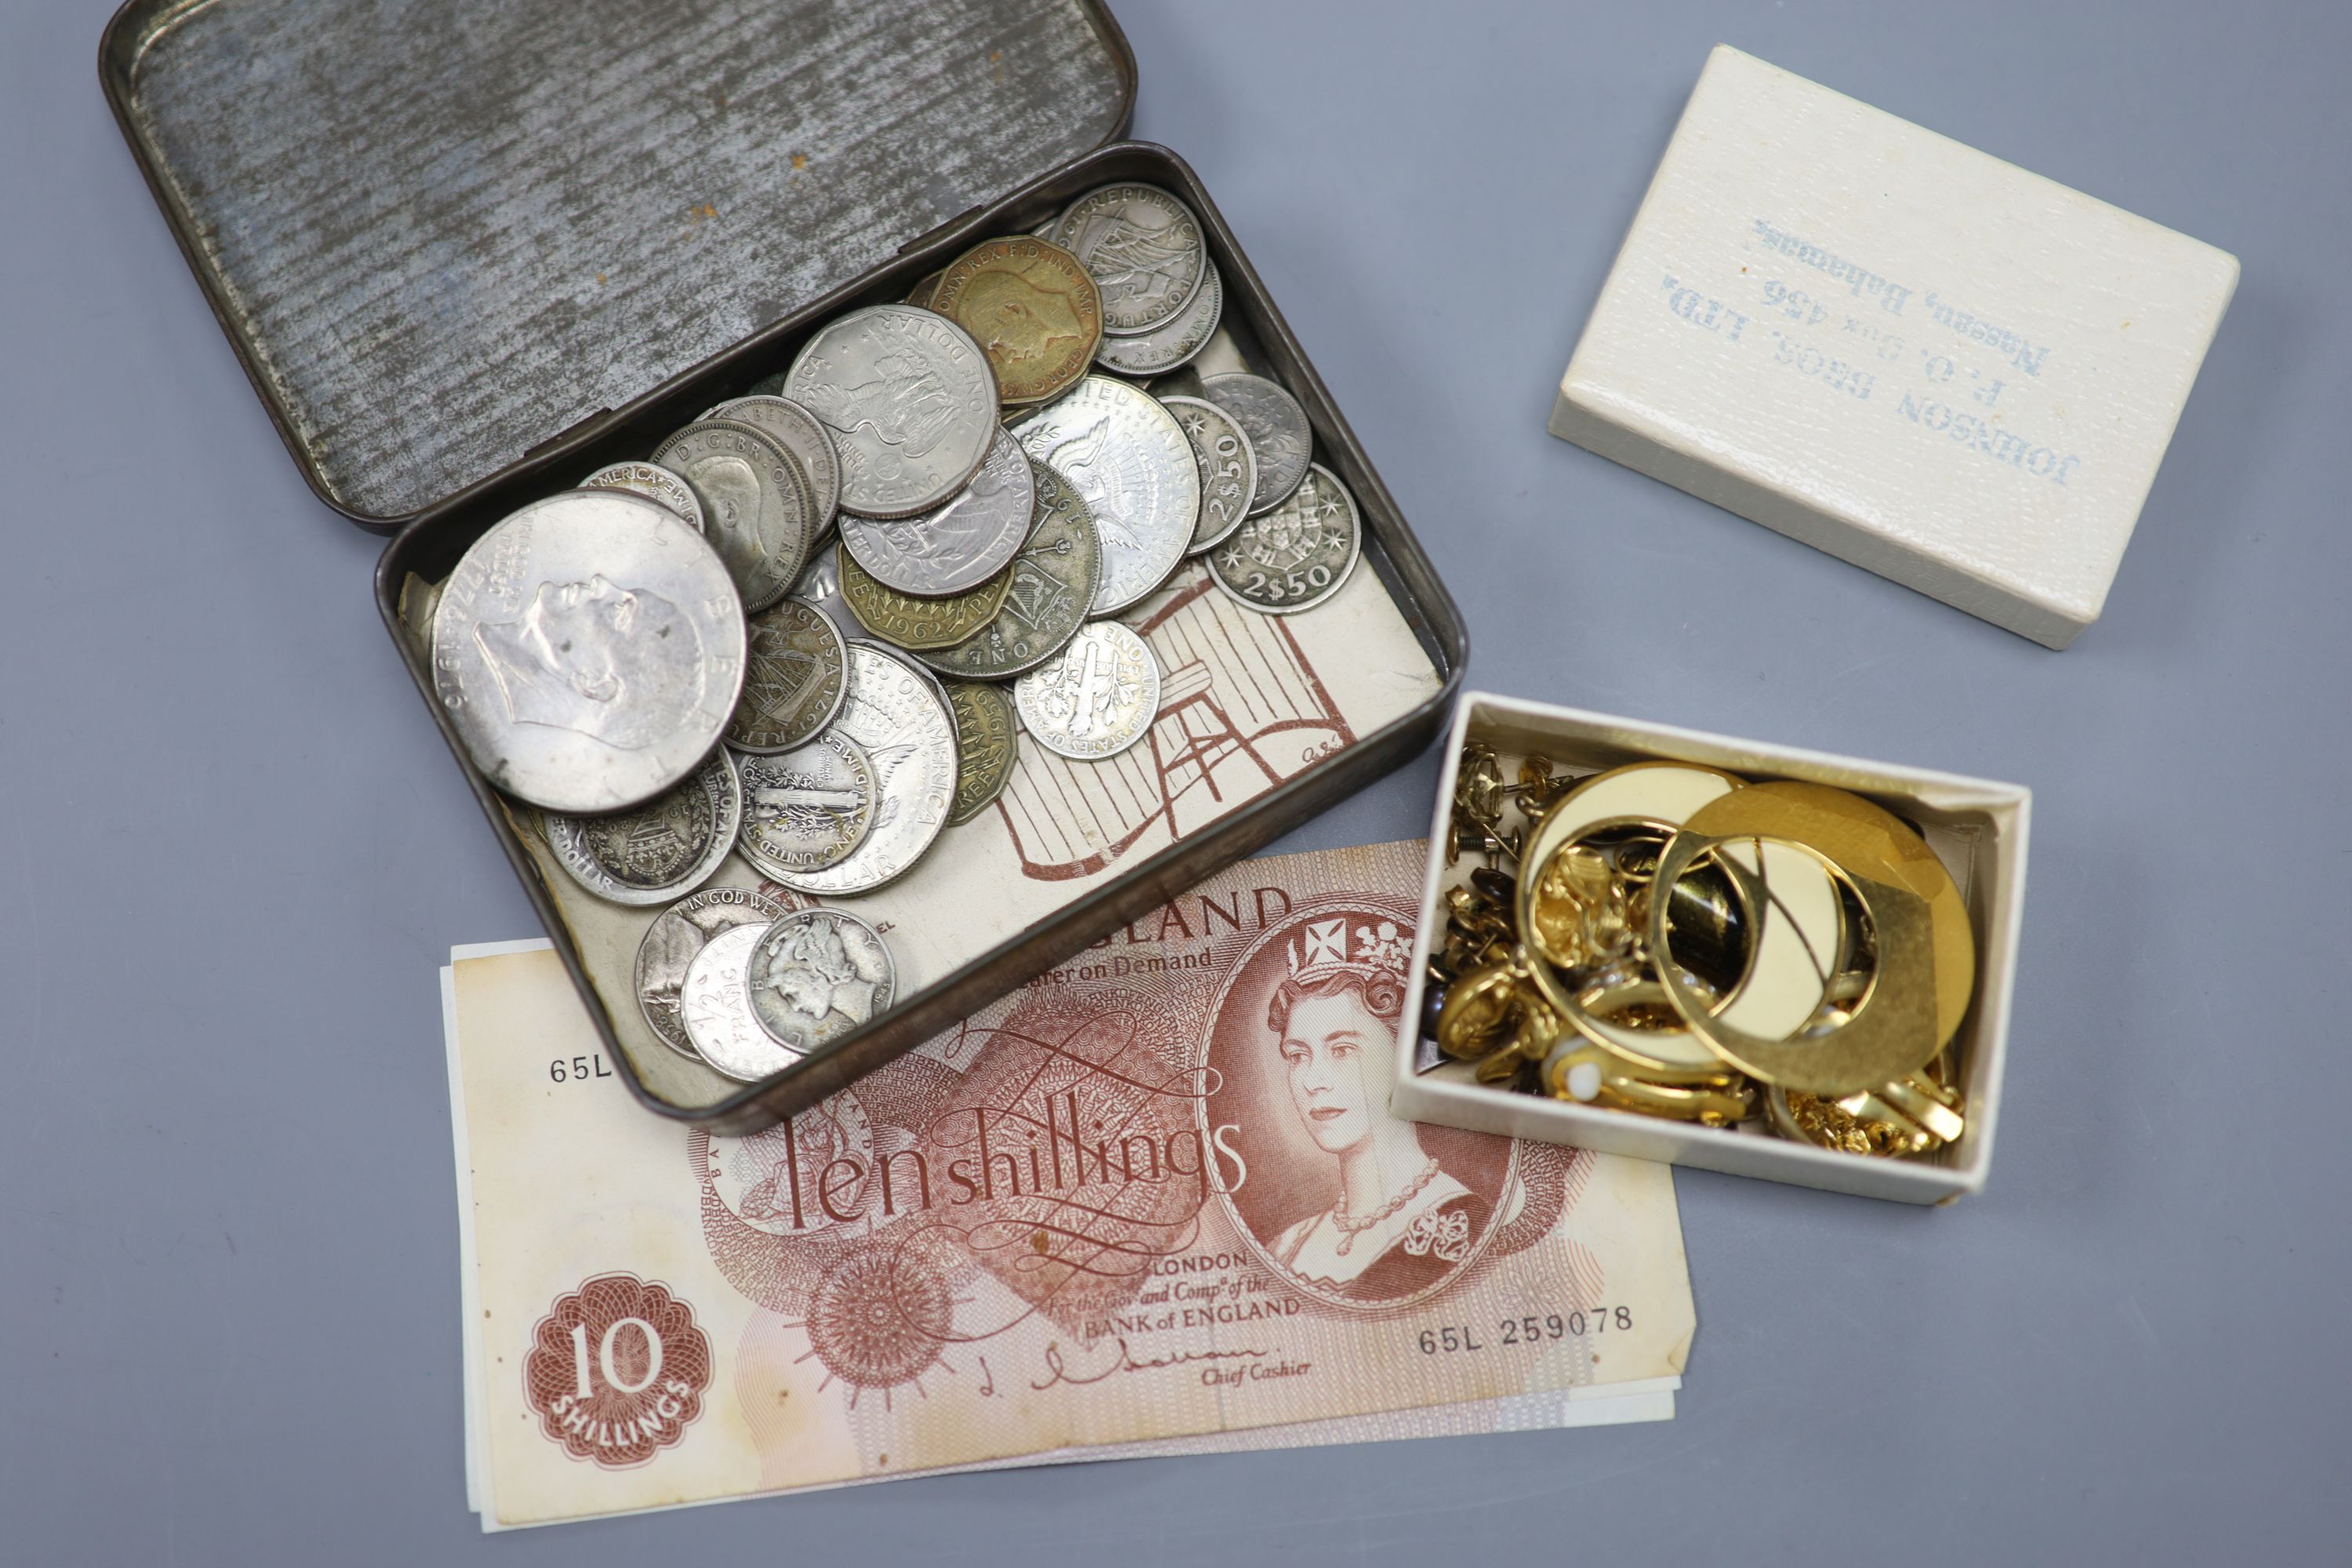 A quantity of silver and costume jewellery, coins and banknotes, including a silver curb-link chain necklace